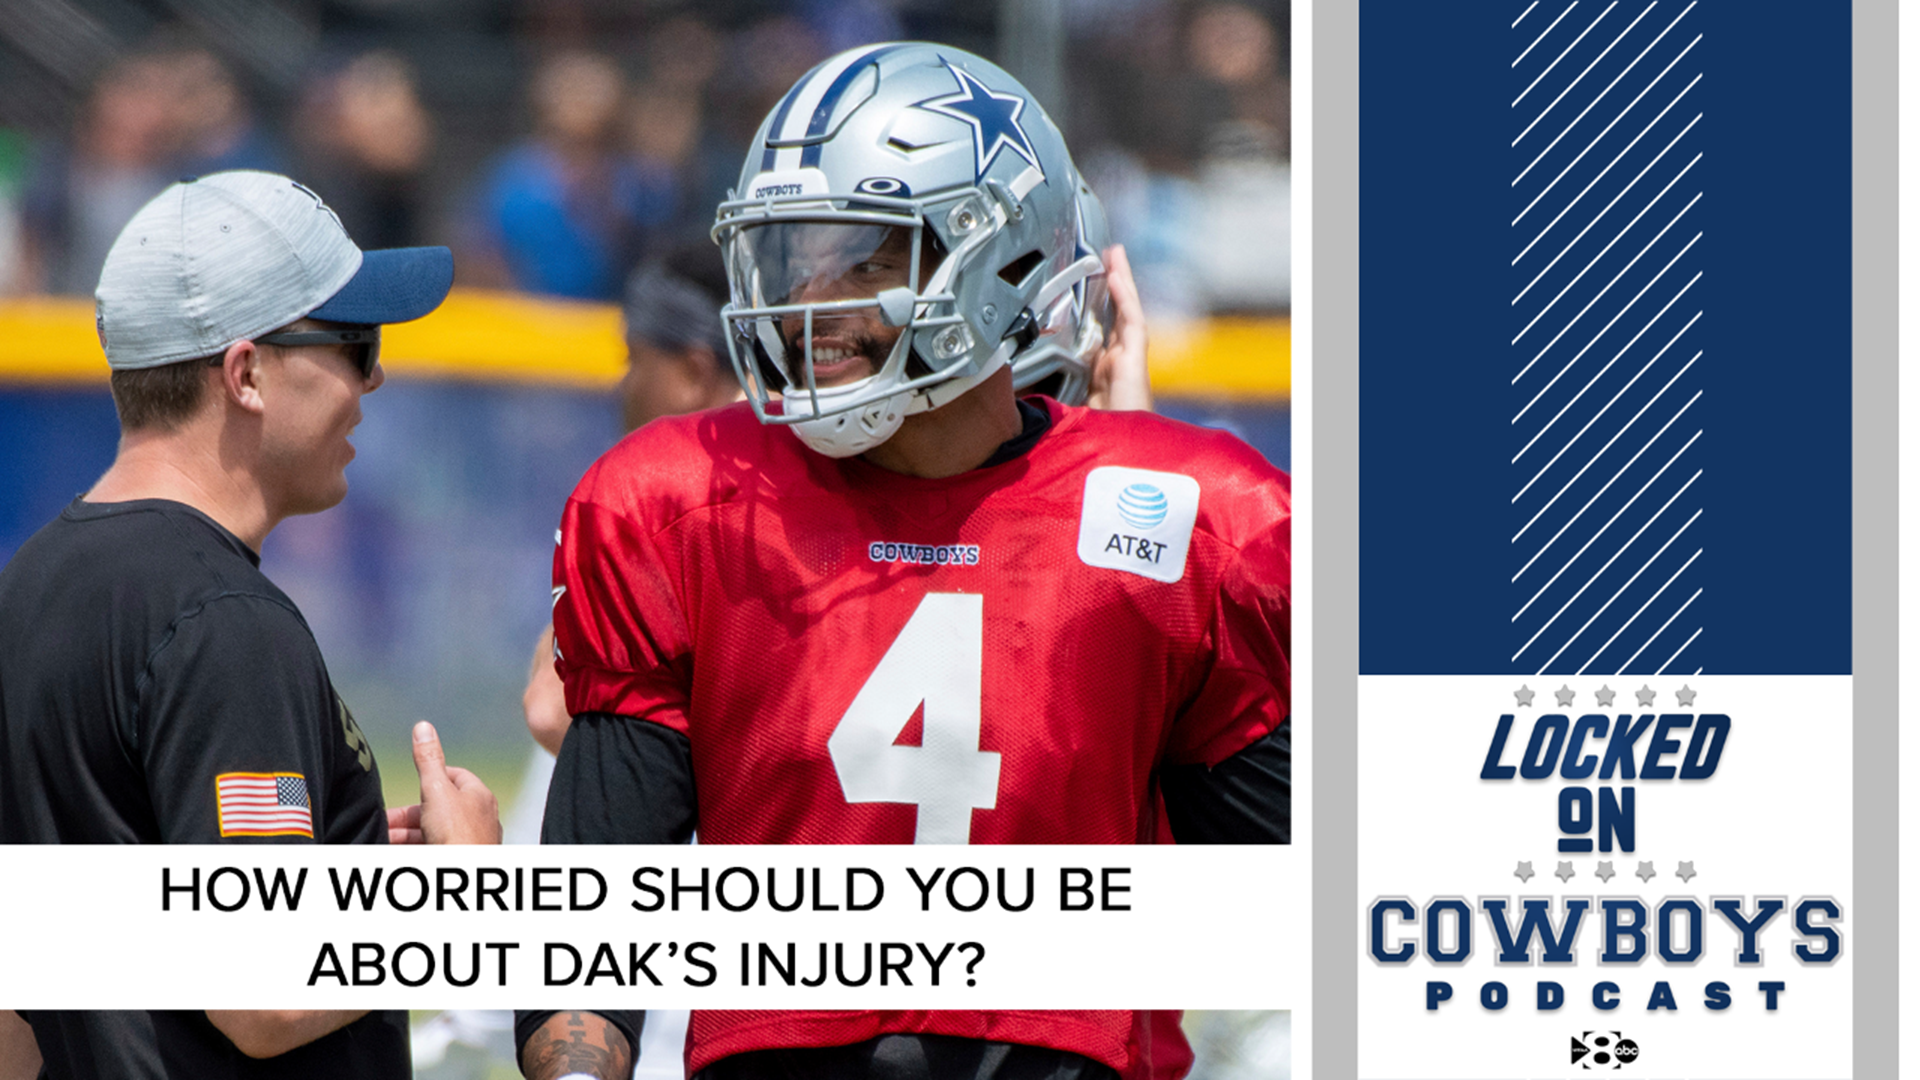 @Marcus_Mosher and @DalltonBMiller discuss Dak's injury and a recap of one of the best Cowboys practices so far on Locked On Cowboys.